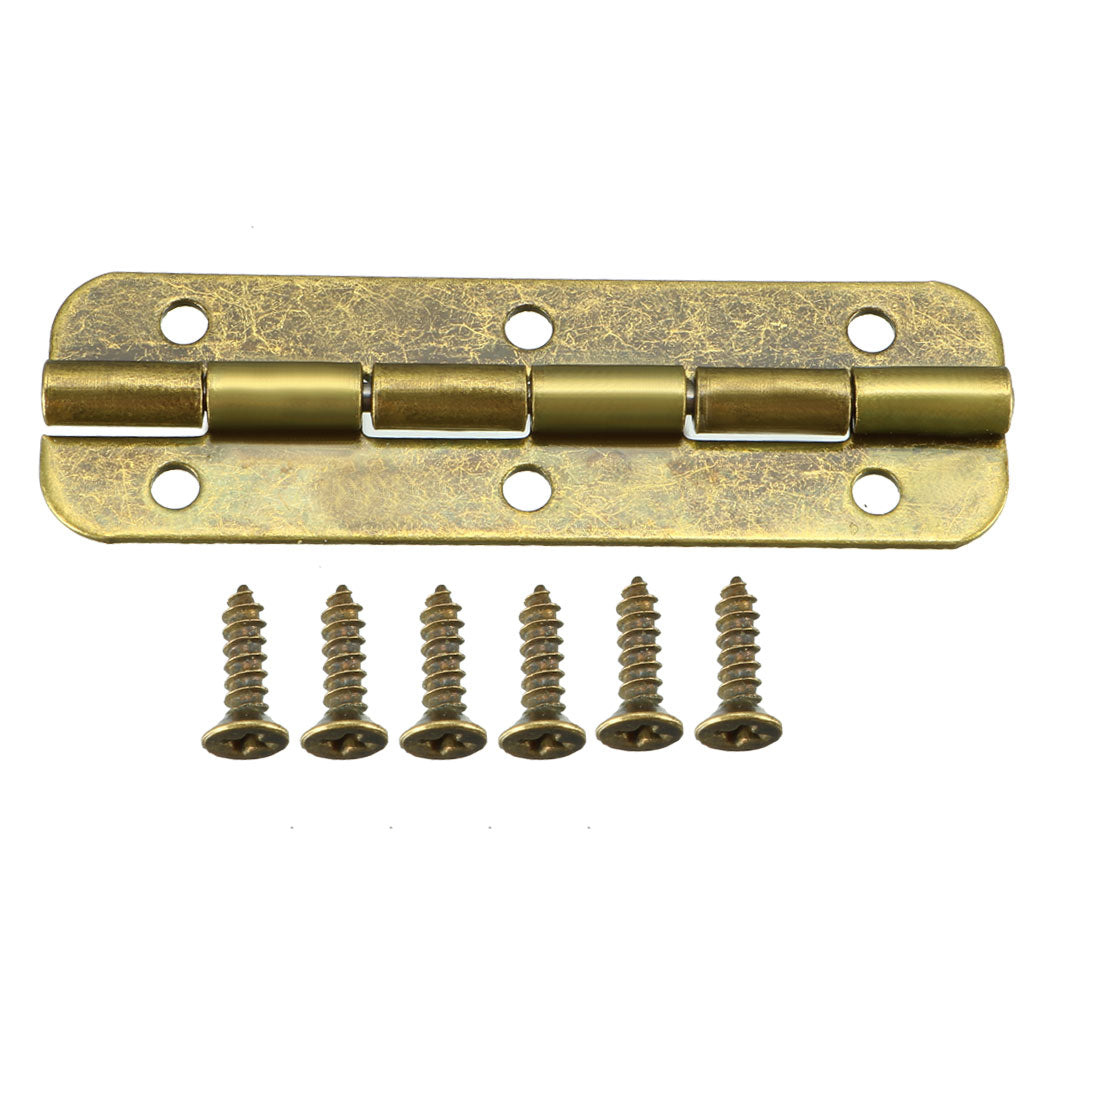 uxcell Uxcell 1.97" Antique Bronze Hinges Retro Hinge Replacement with Screws 10pcs